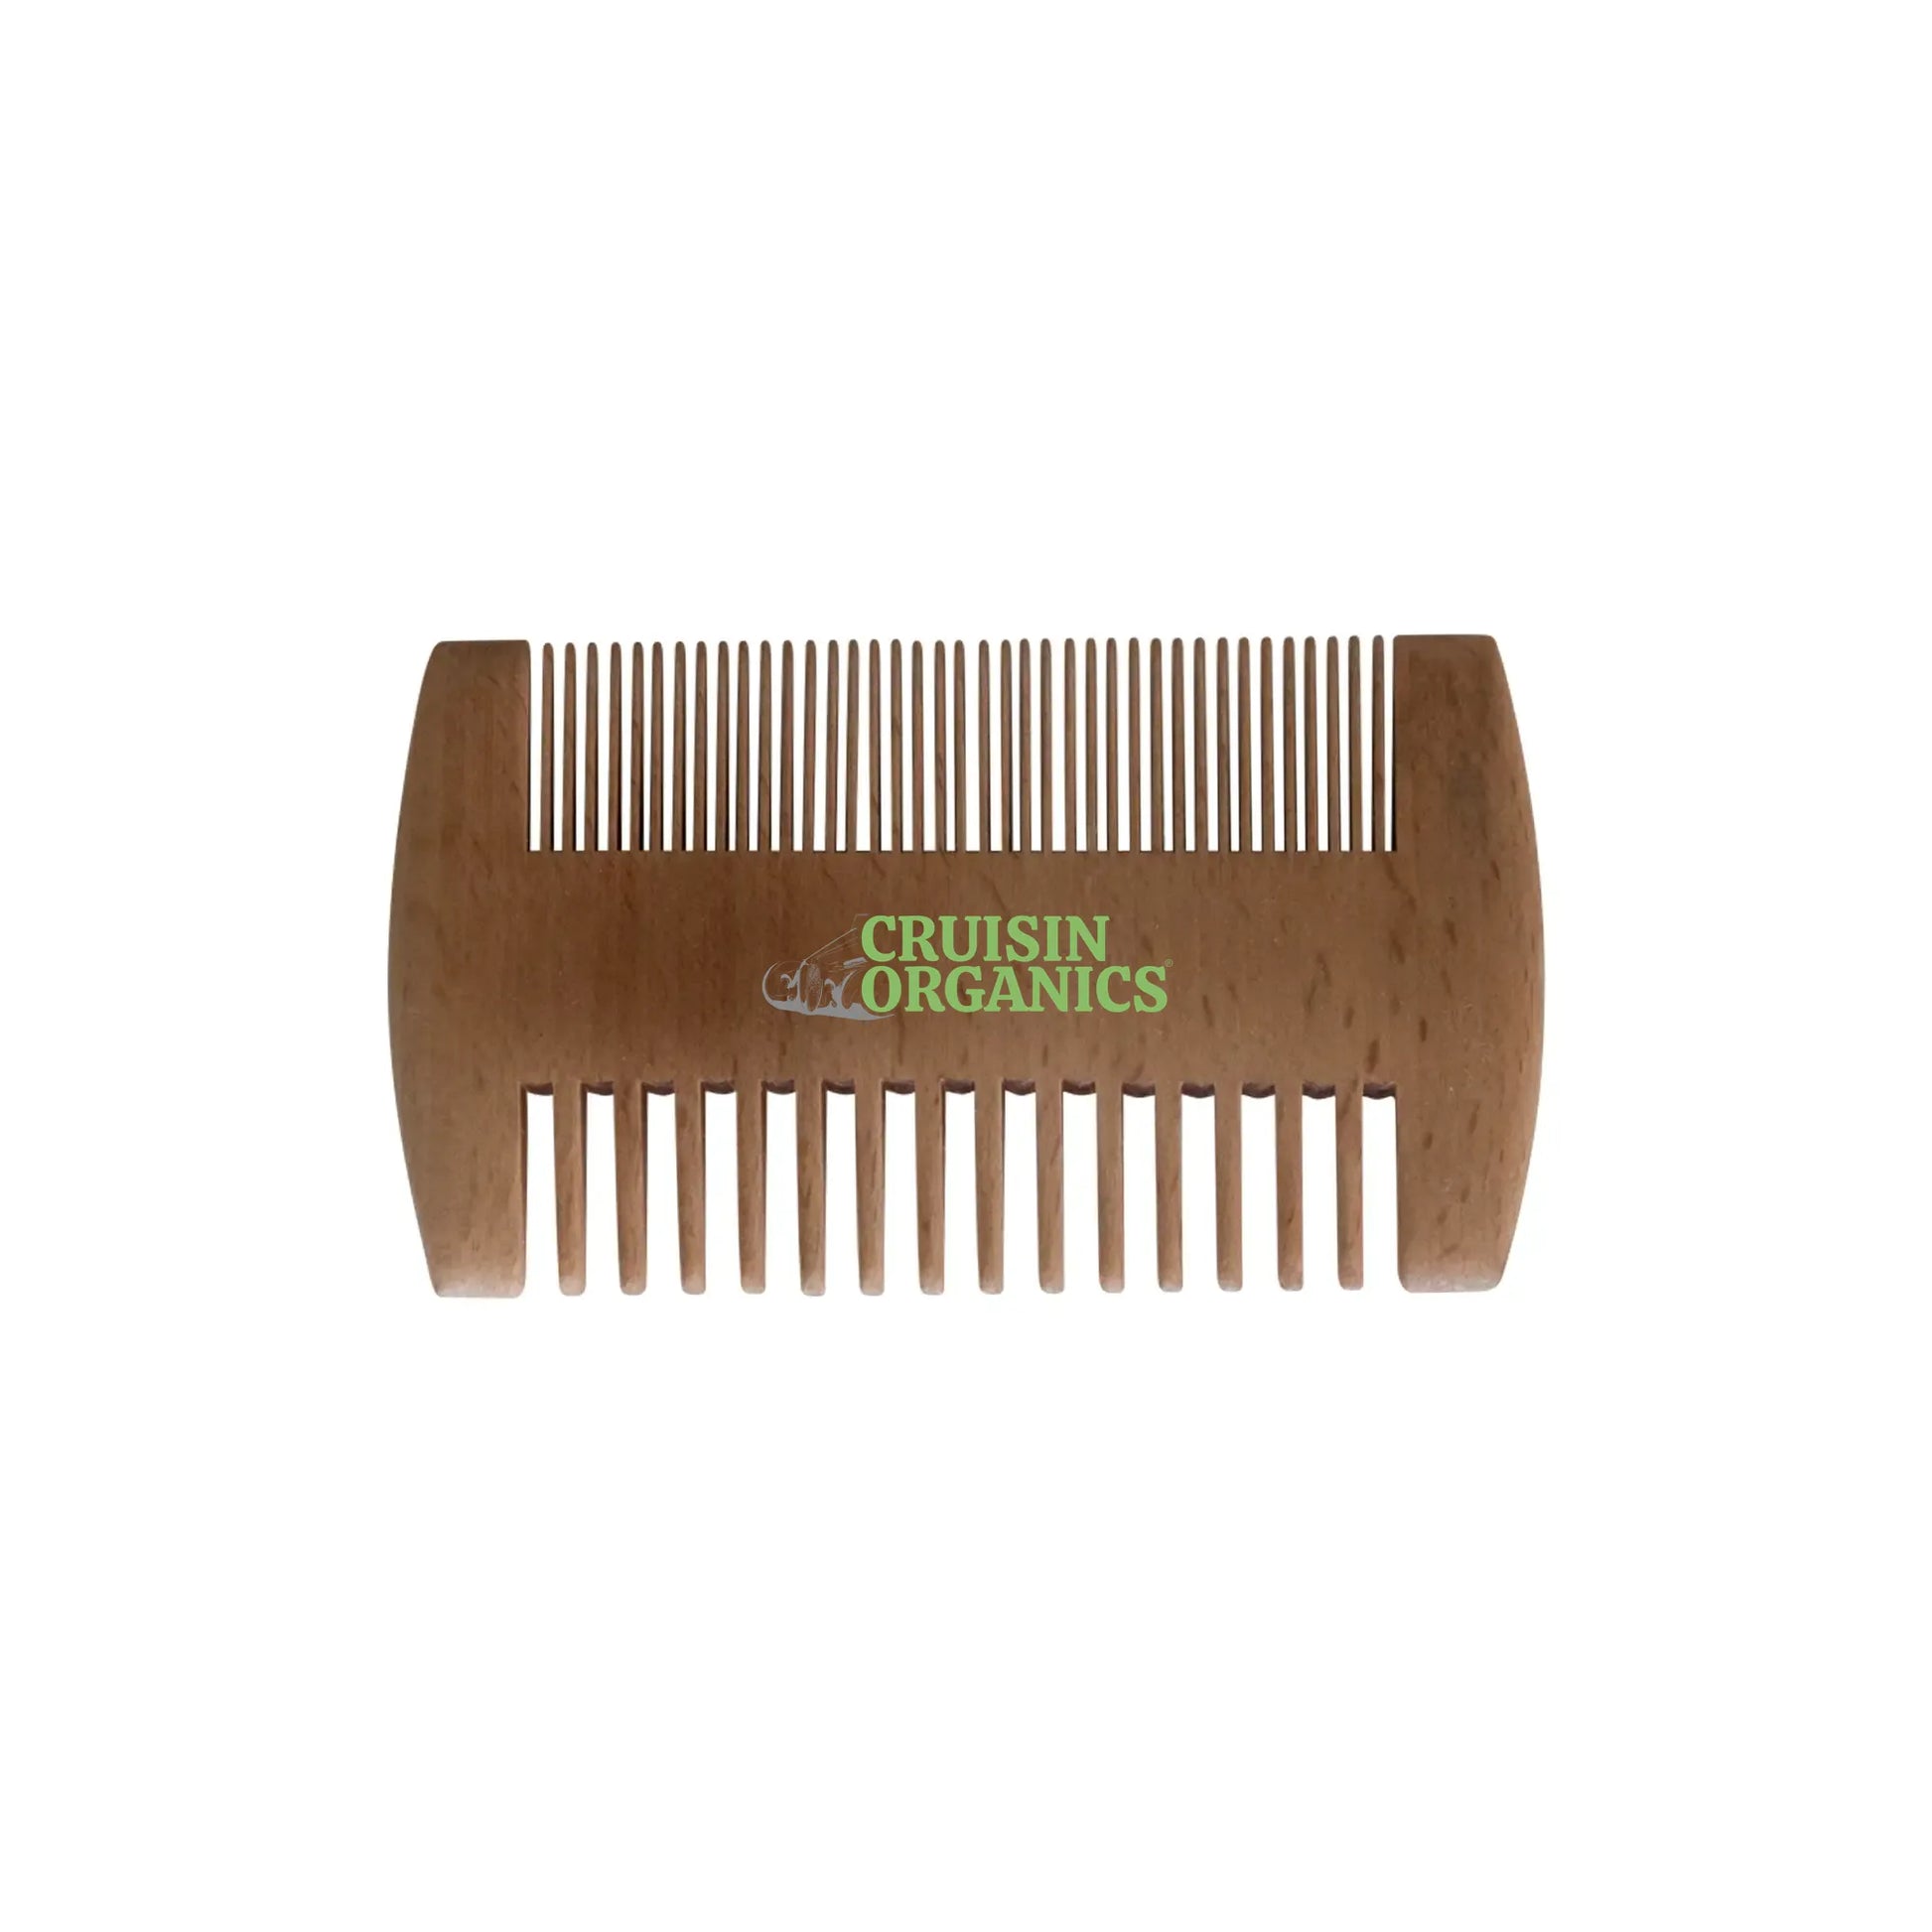 Expertly maintain and shape your hair and beard with our organic bamboo comb. It's made from 100% natural and reusable materials, with both wide-tooth and fine-tooth options for optimal circulation. A must-have for any beard or hair grooming kit.